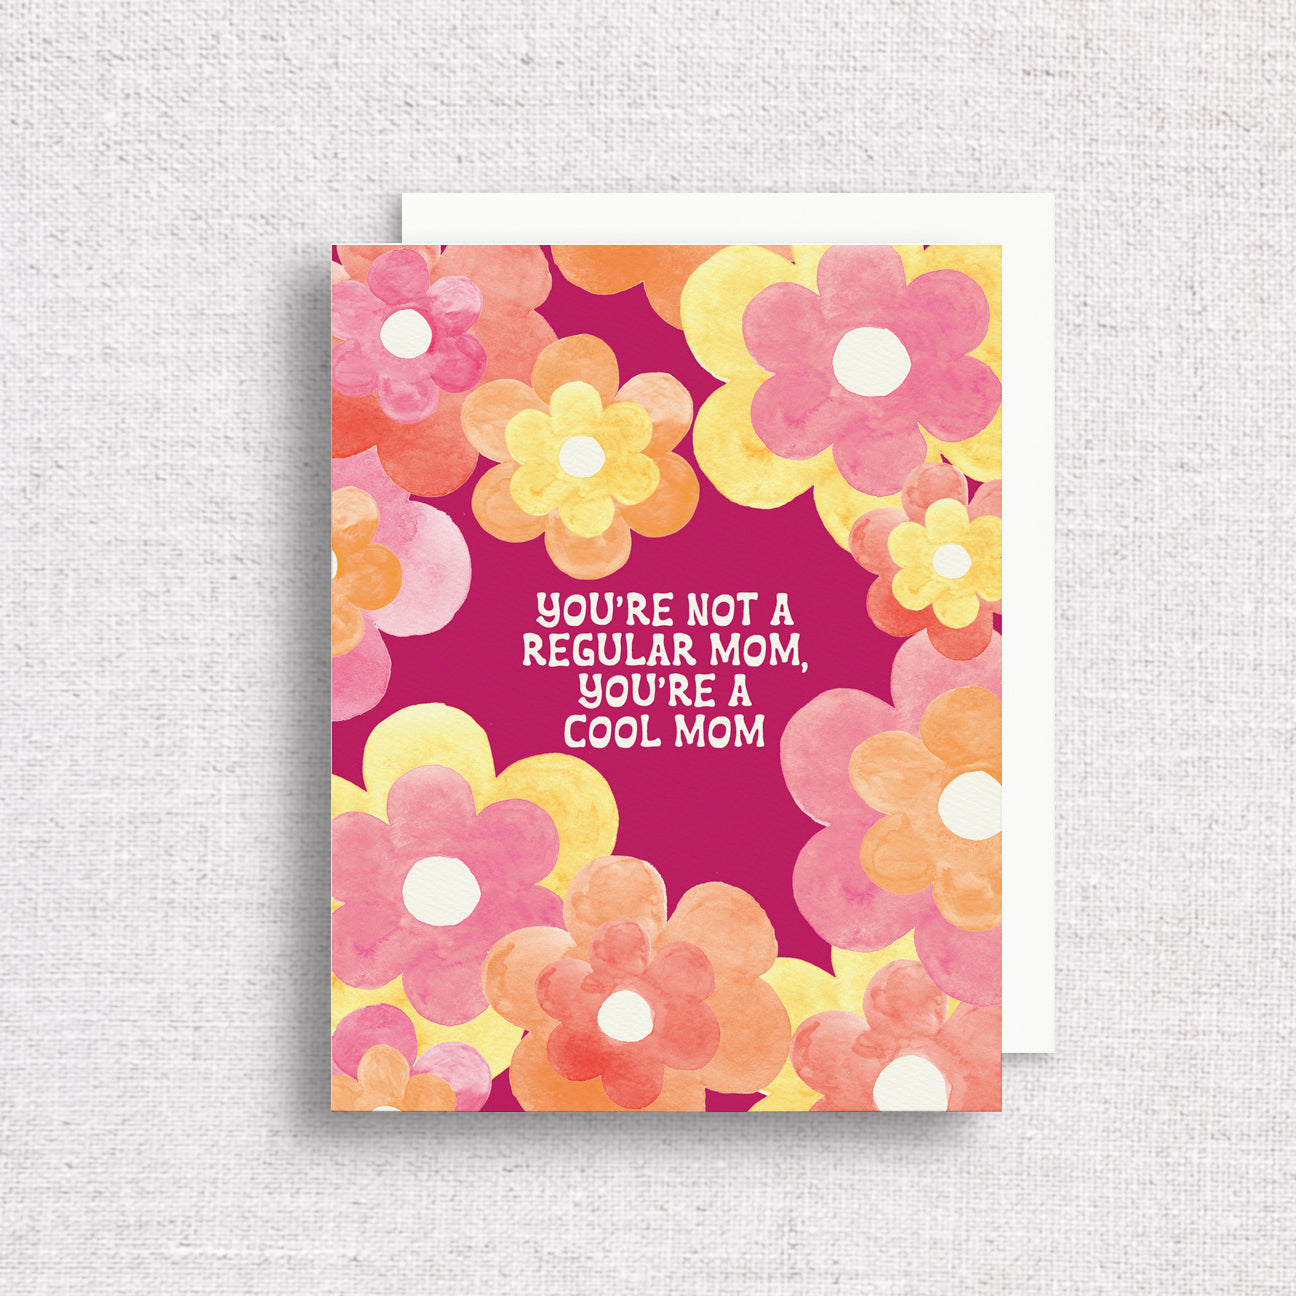 "You're not a regular Mom, you're a cool Mom" Greeting Card by Gert & Co